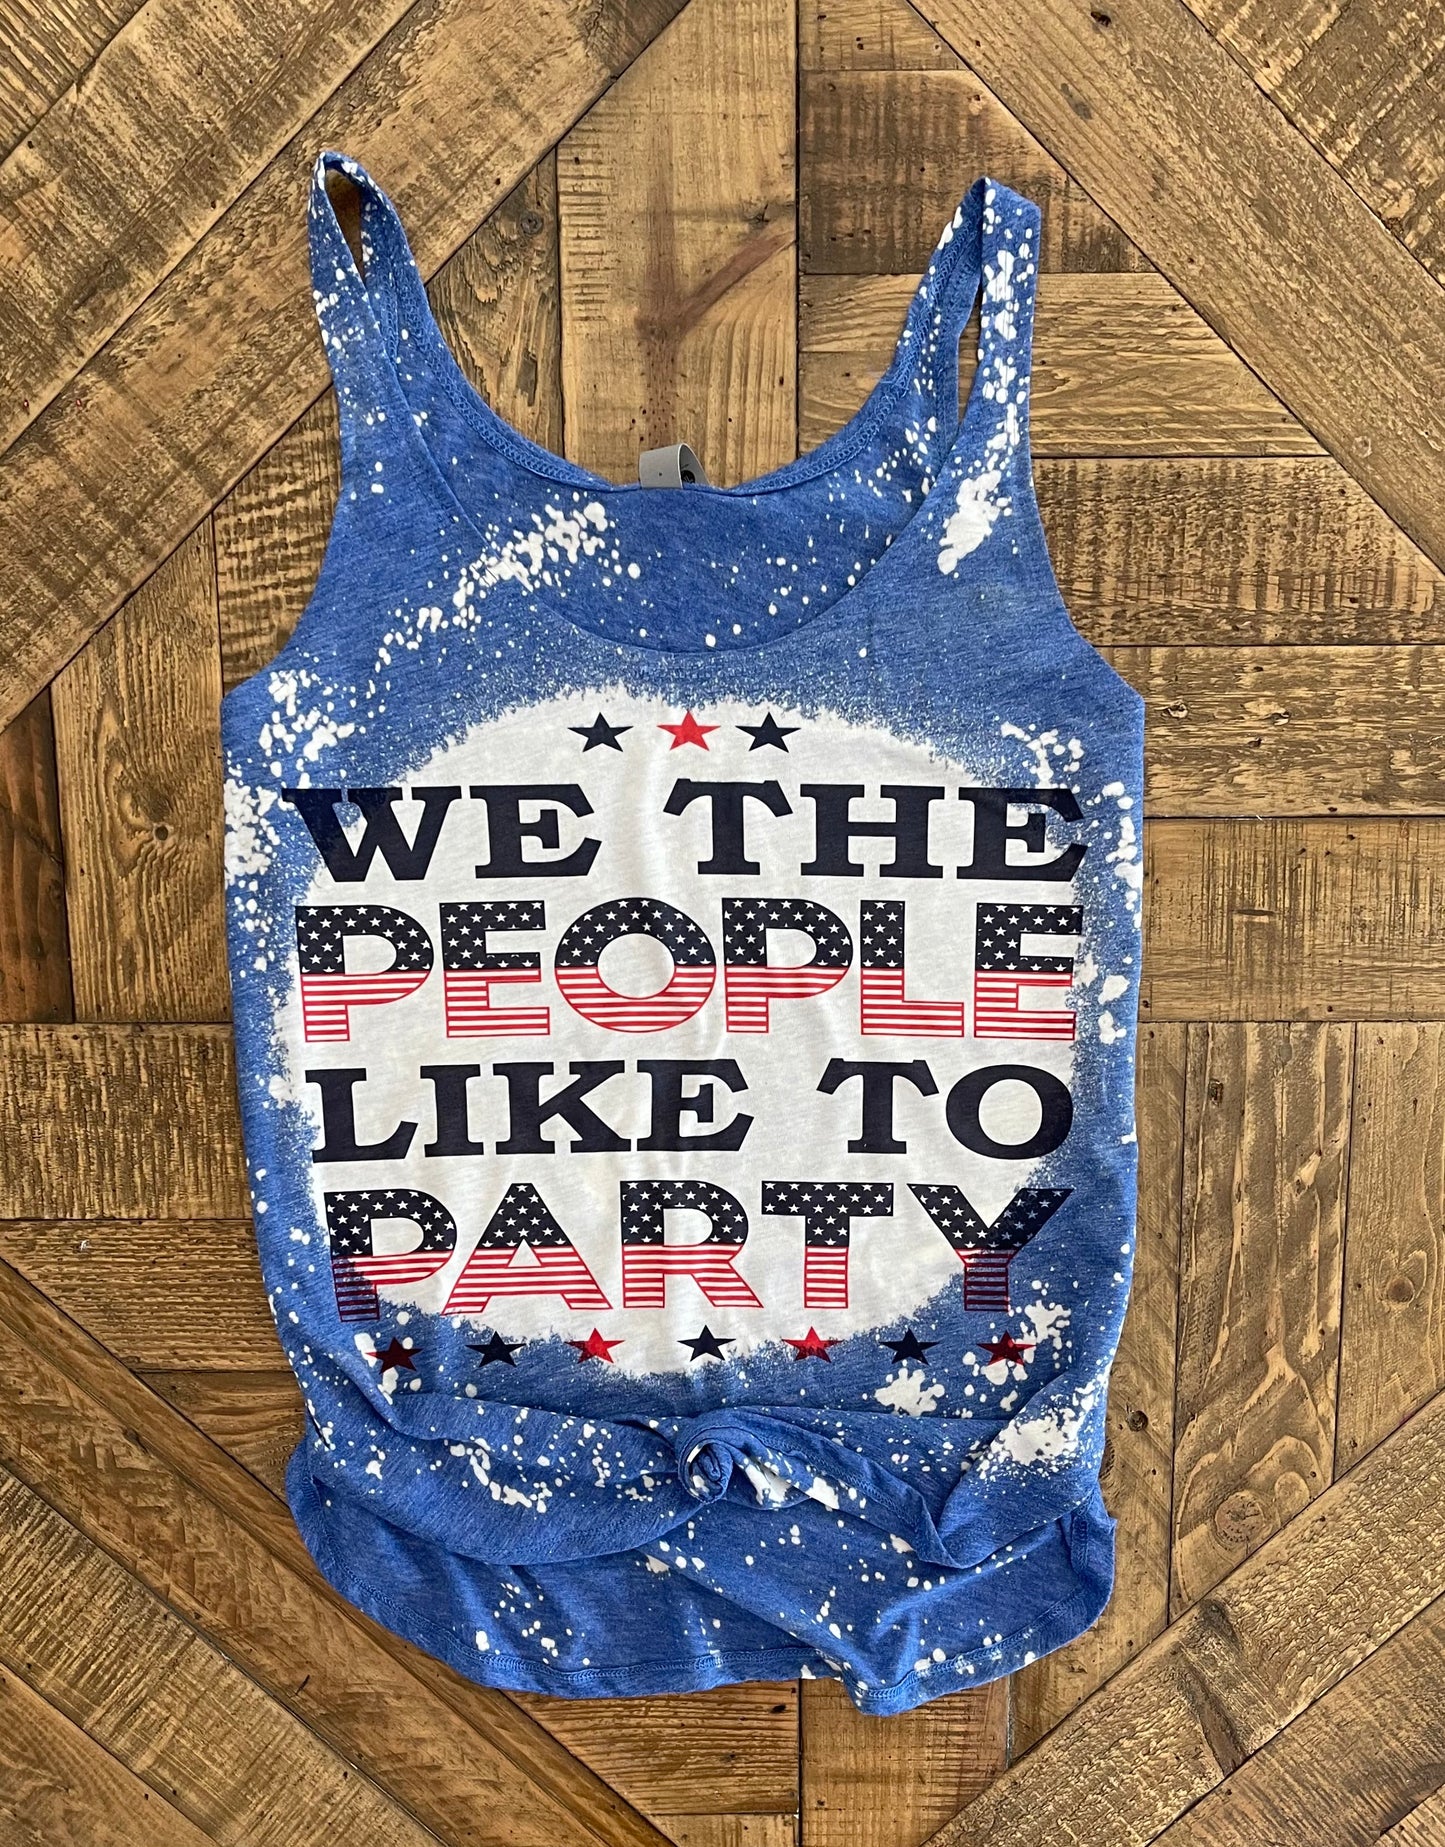 We The People Like To Party 🇺🇸 - Sands Serendipity Boutique